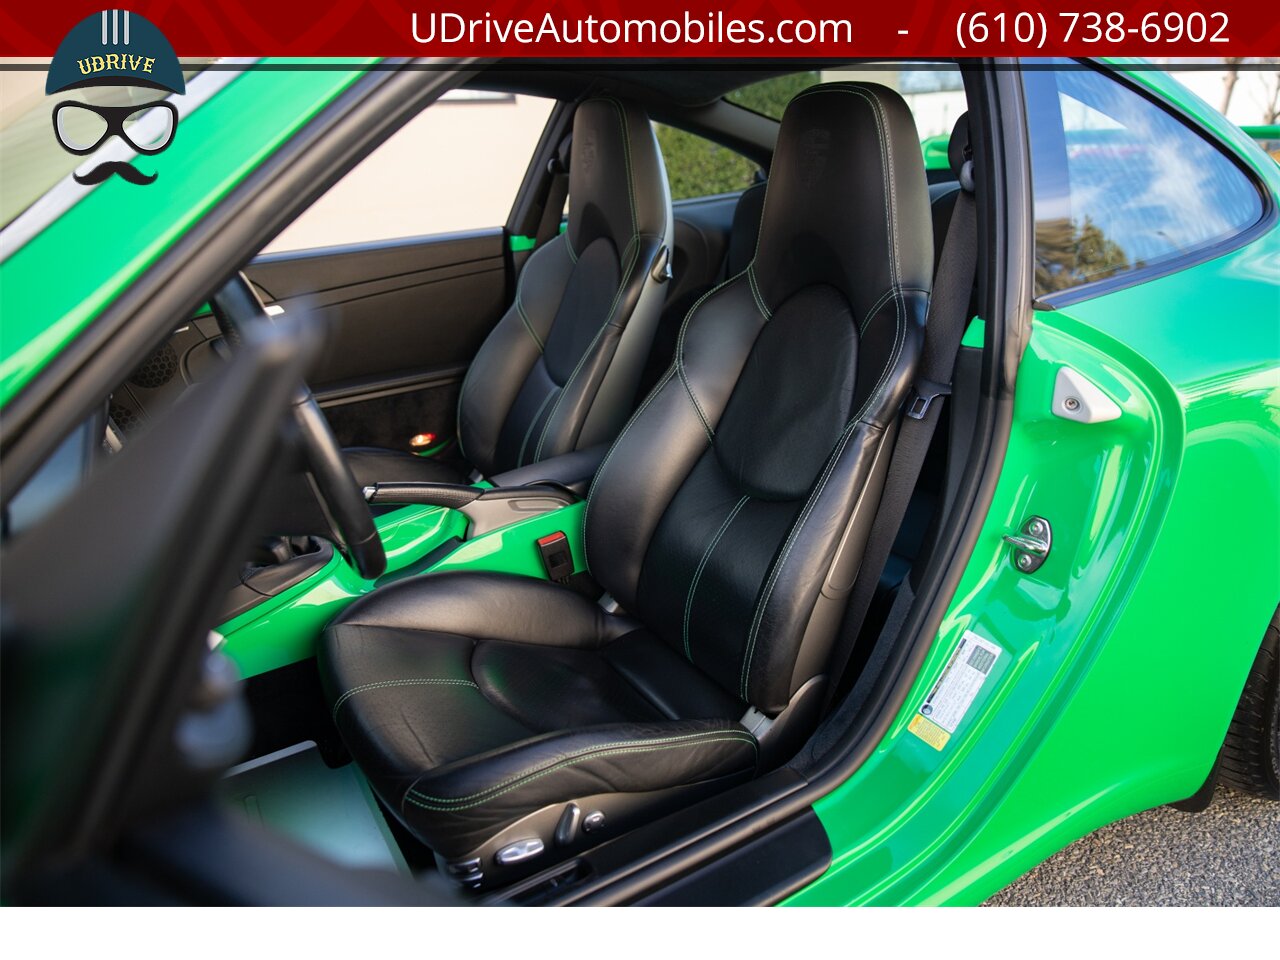 2008 Porsche 911 S 997 6Sp PTS RS Green AeroKit 1of a Kind  $118k MSRP Champion F77 Pkg RG5 Whls - Photo 6 - West Chester, PA 19382